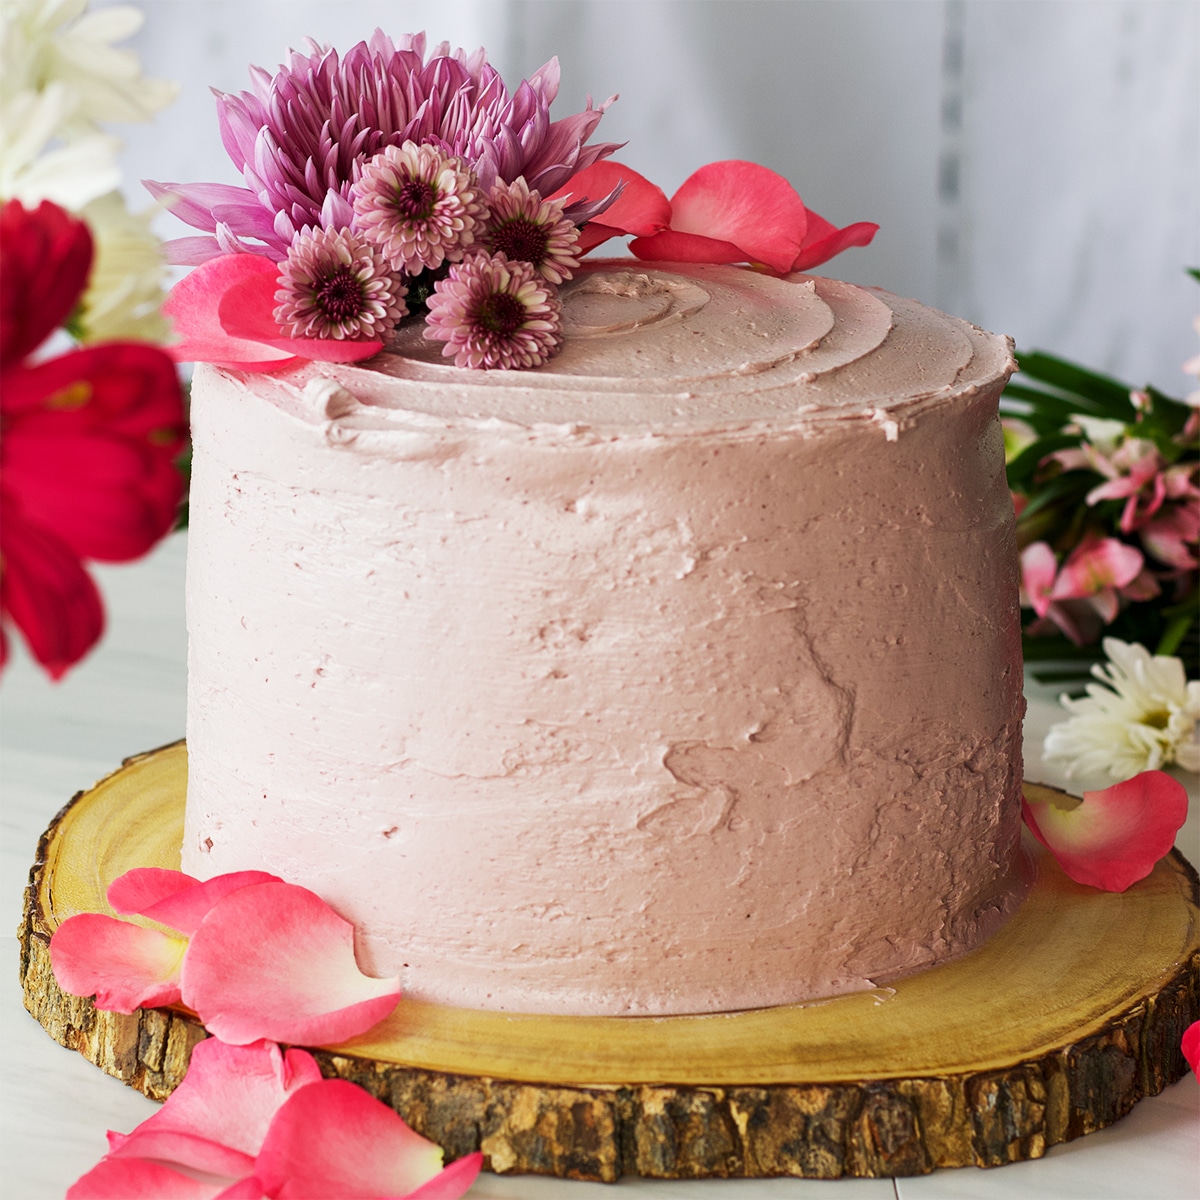 A lemon layer cake frosted with blackberry buttercream and decorated with fresh flowers.